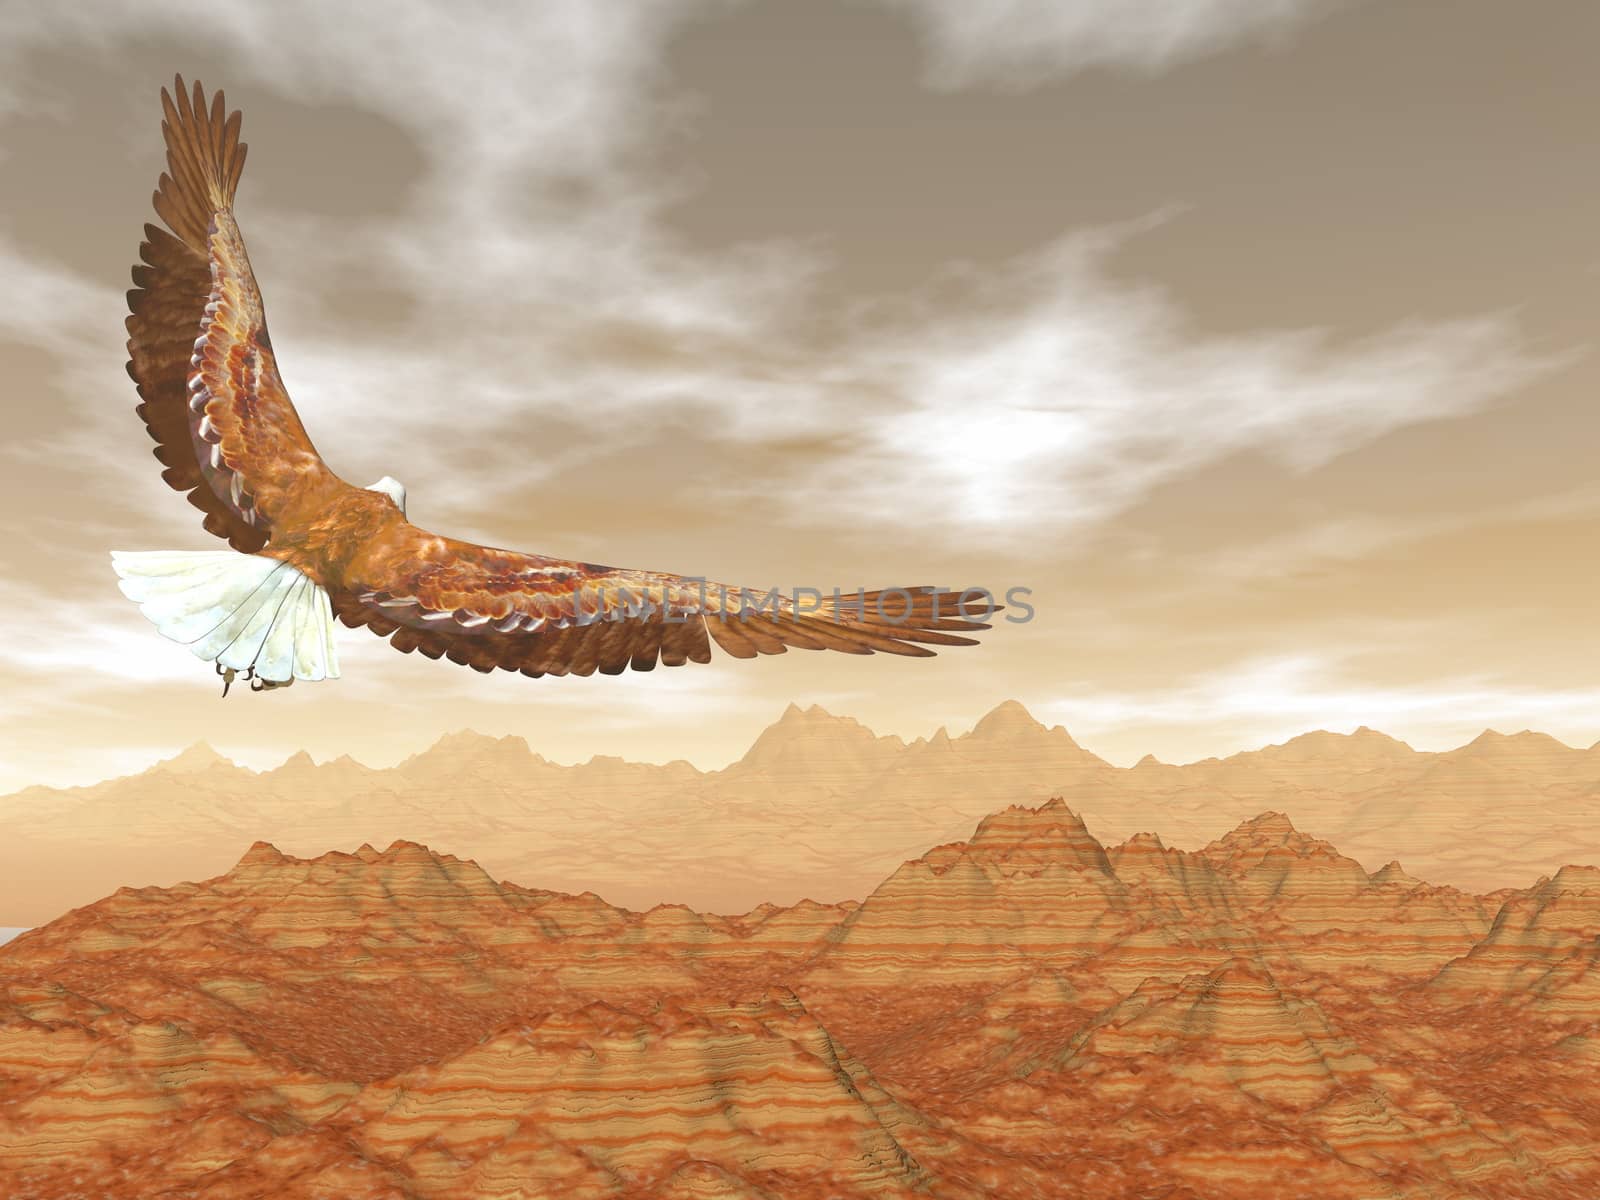 Bald eagle flying upon rocky mountains by sunset light - 3D render